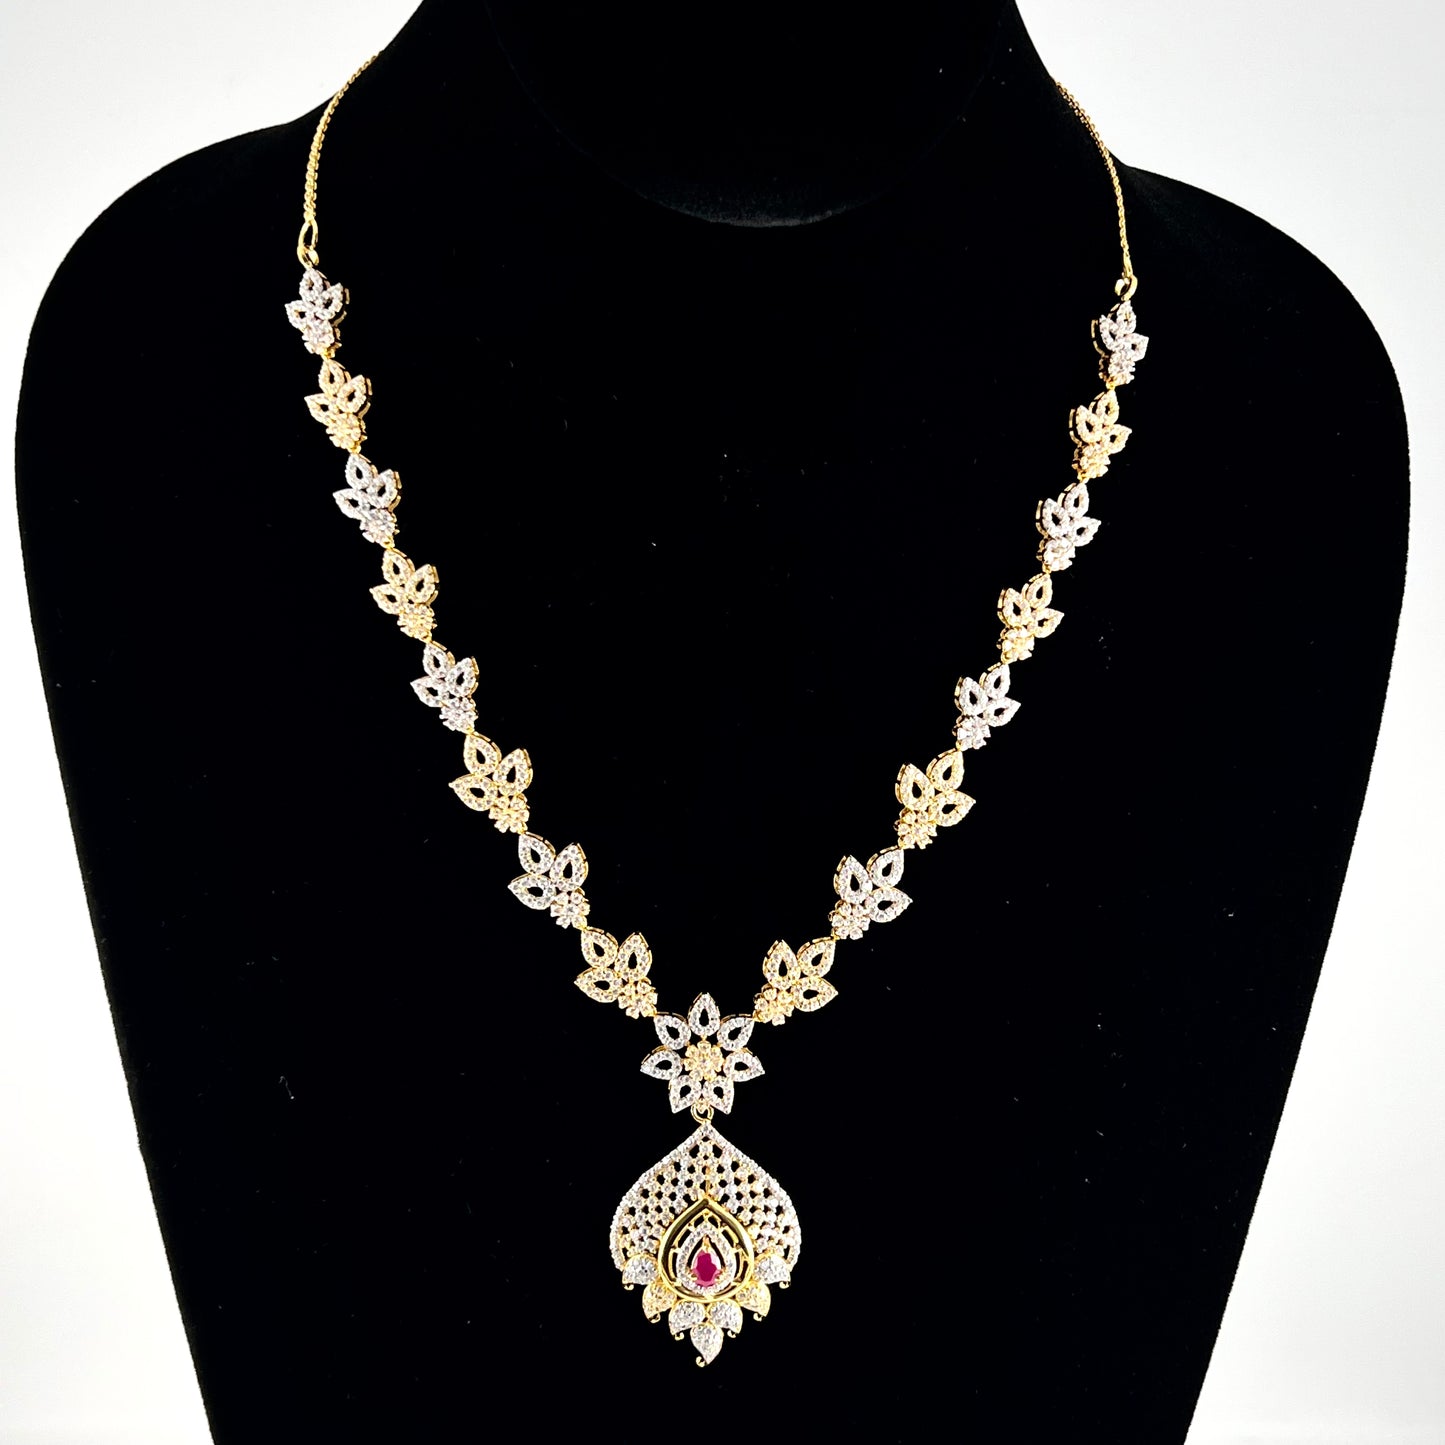 Glittering Cubic Zarconia Necklace with Singular Ruby Colored Stone